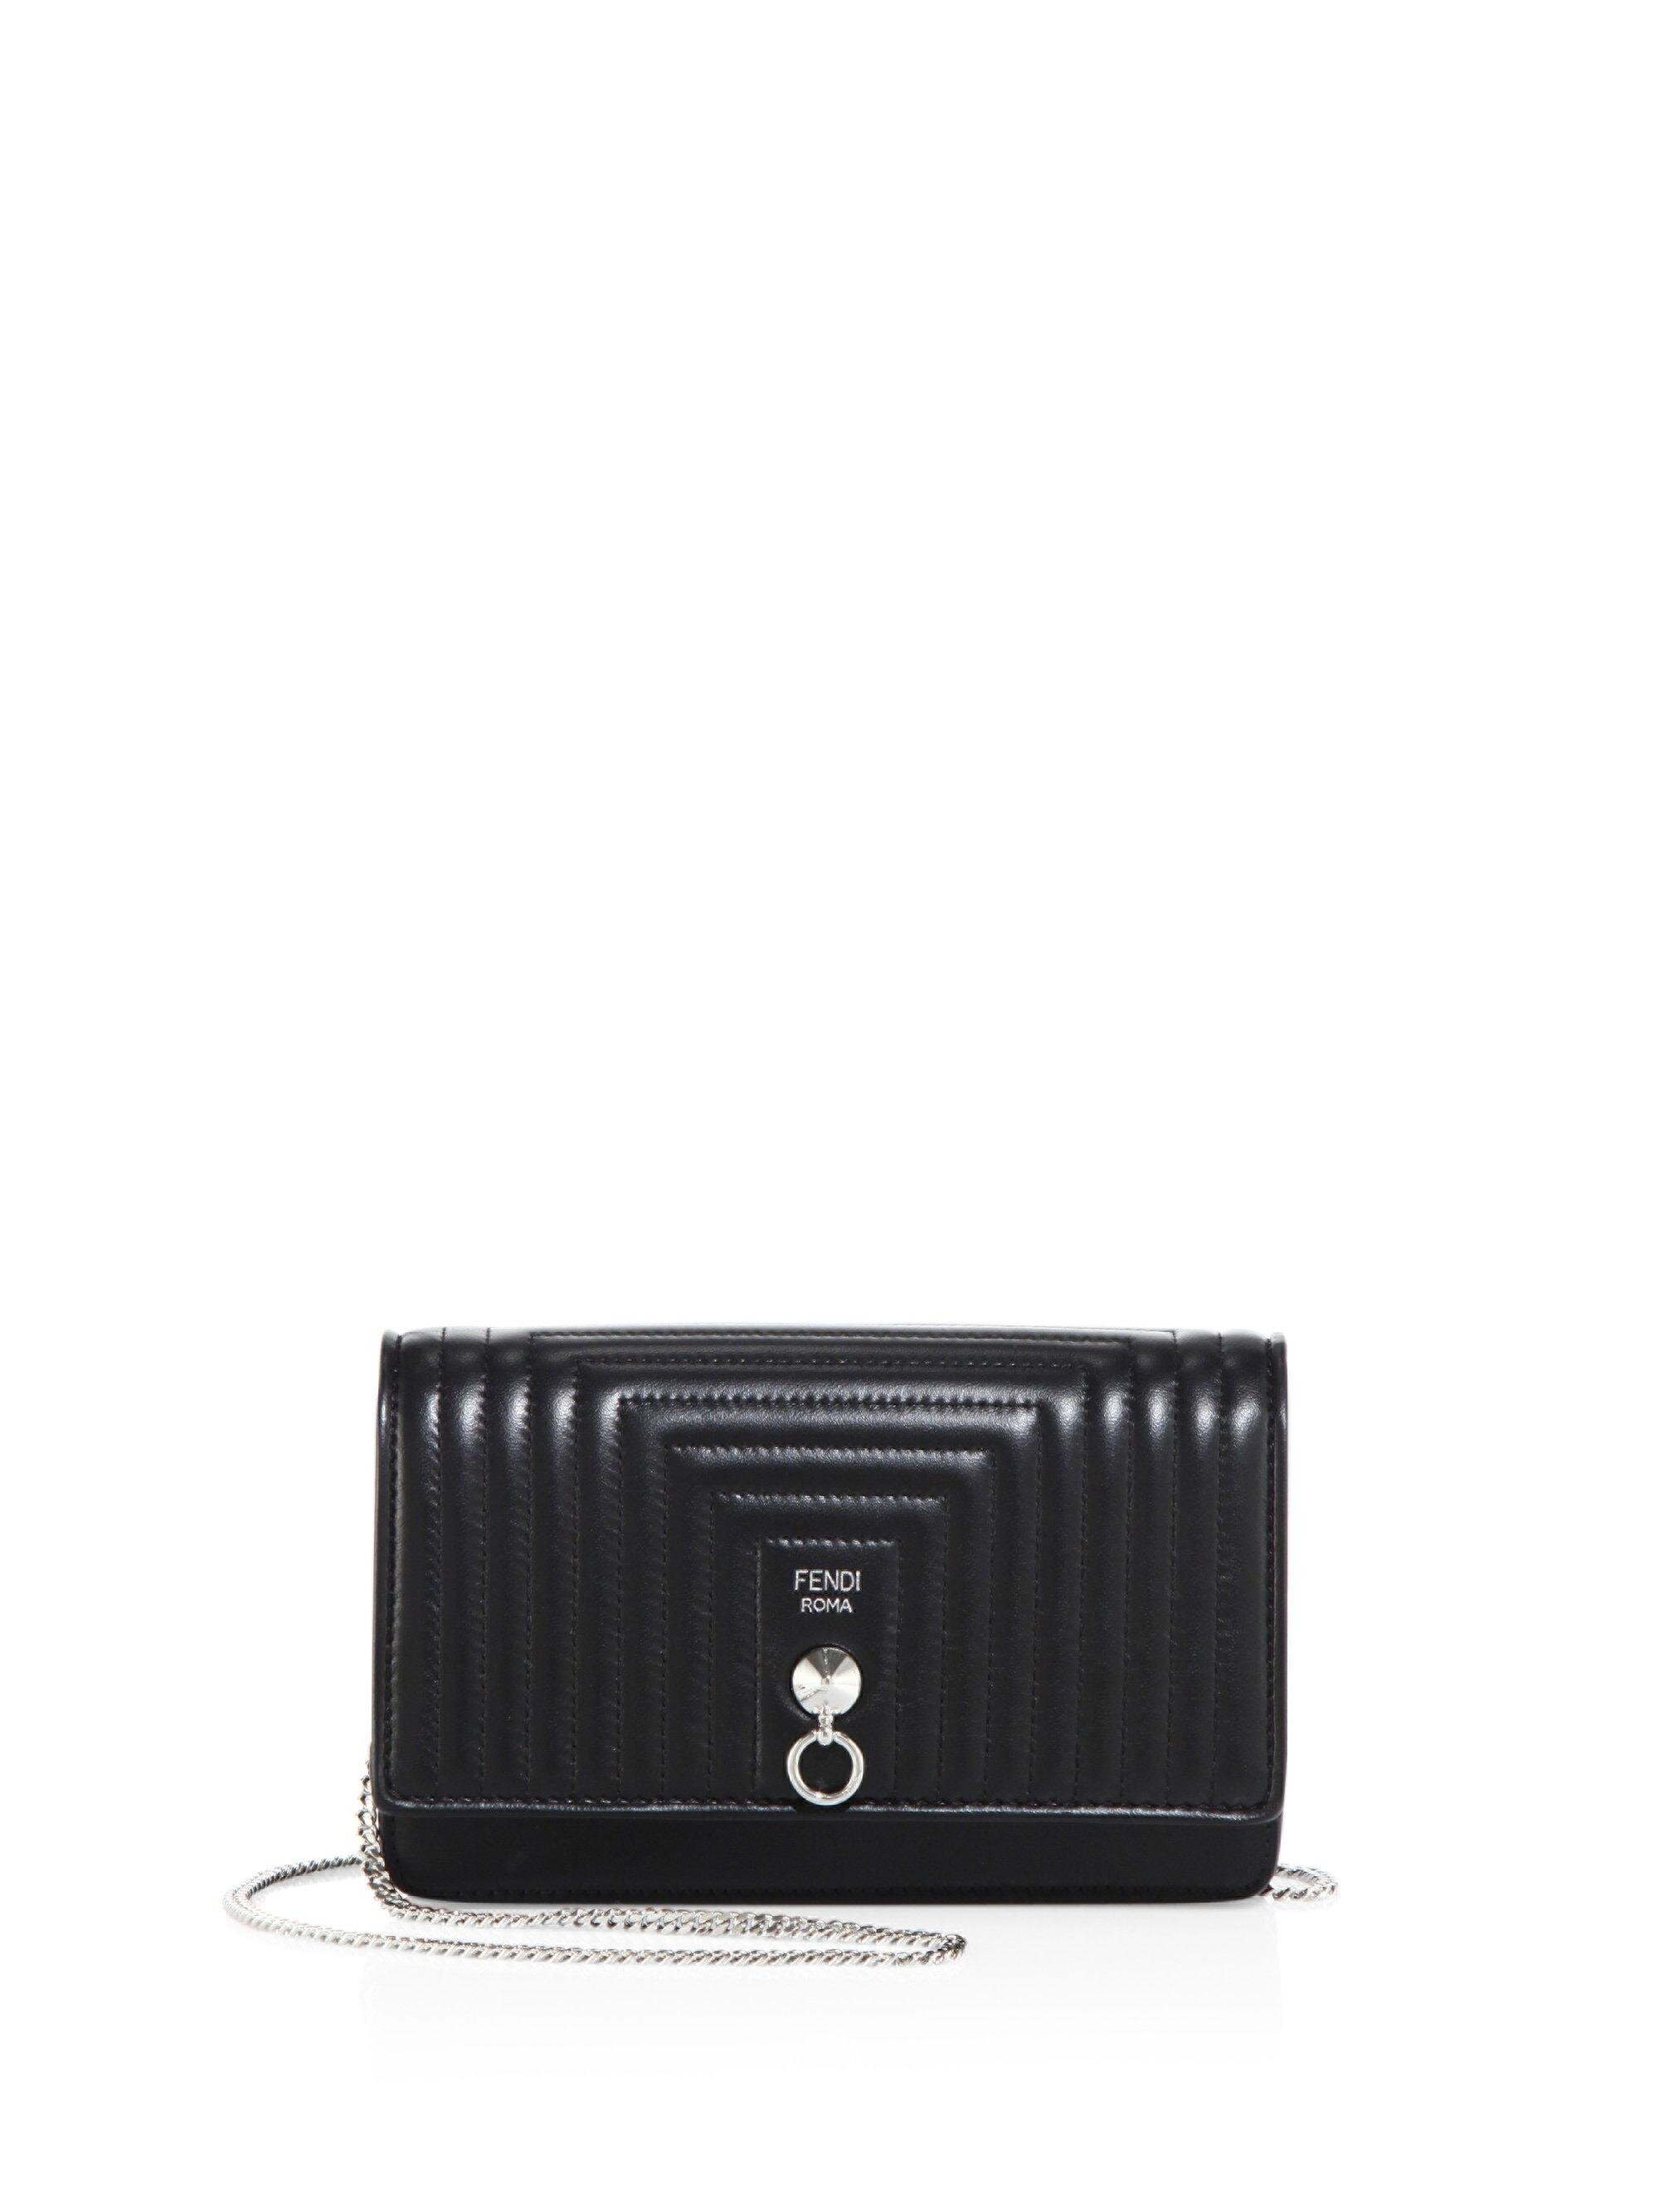 Fendi Dotcom Quilted Leather Chain Wallet in Black.jpg